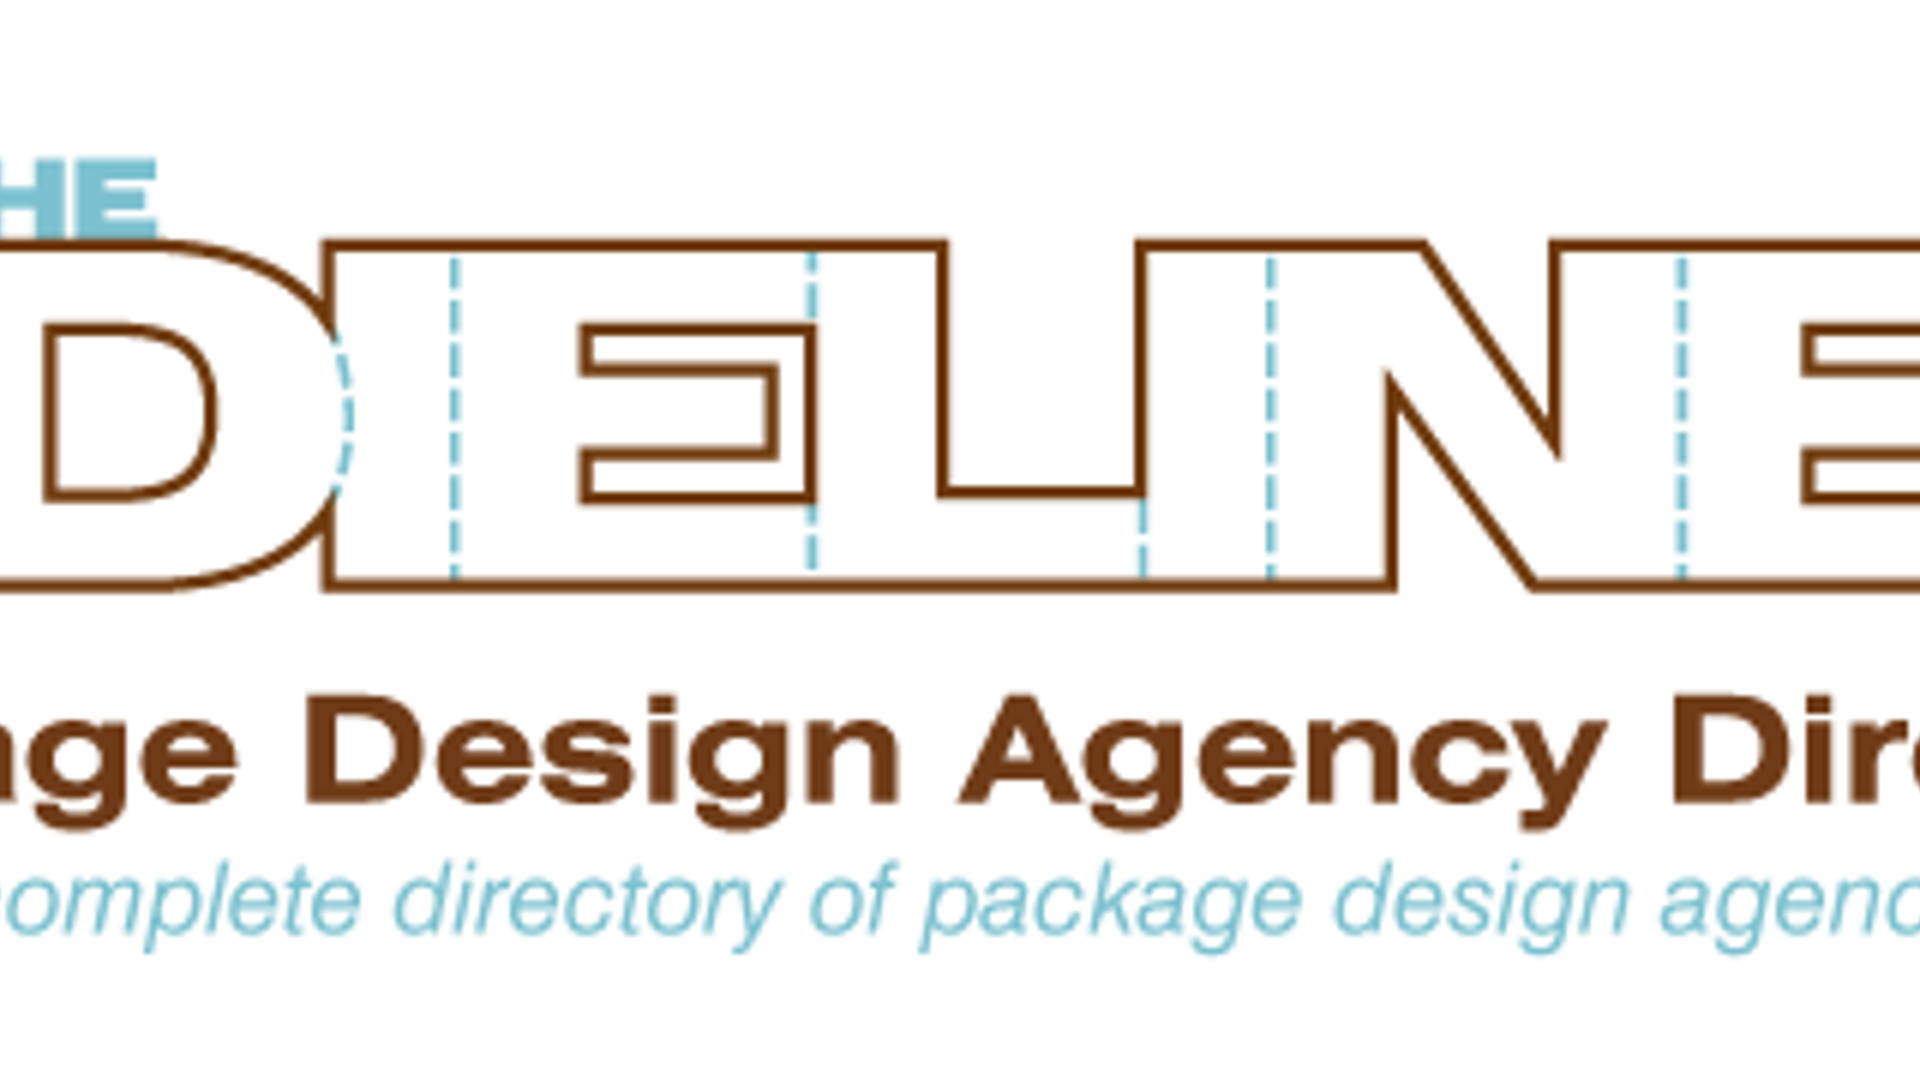 Featured image for Package Design Agency Directory